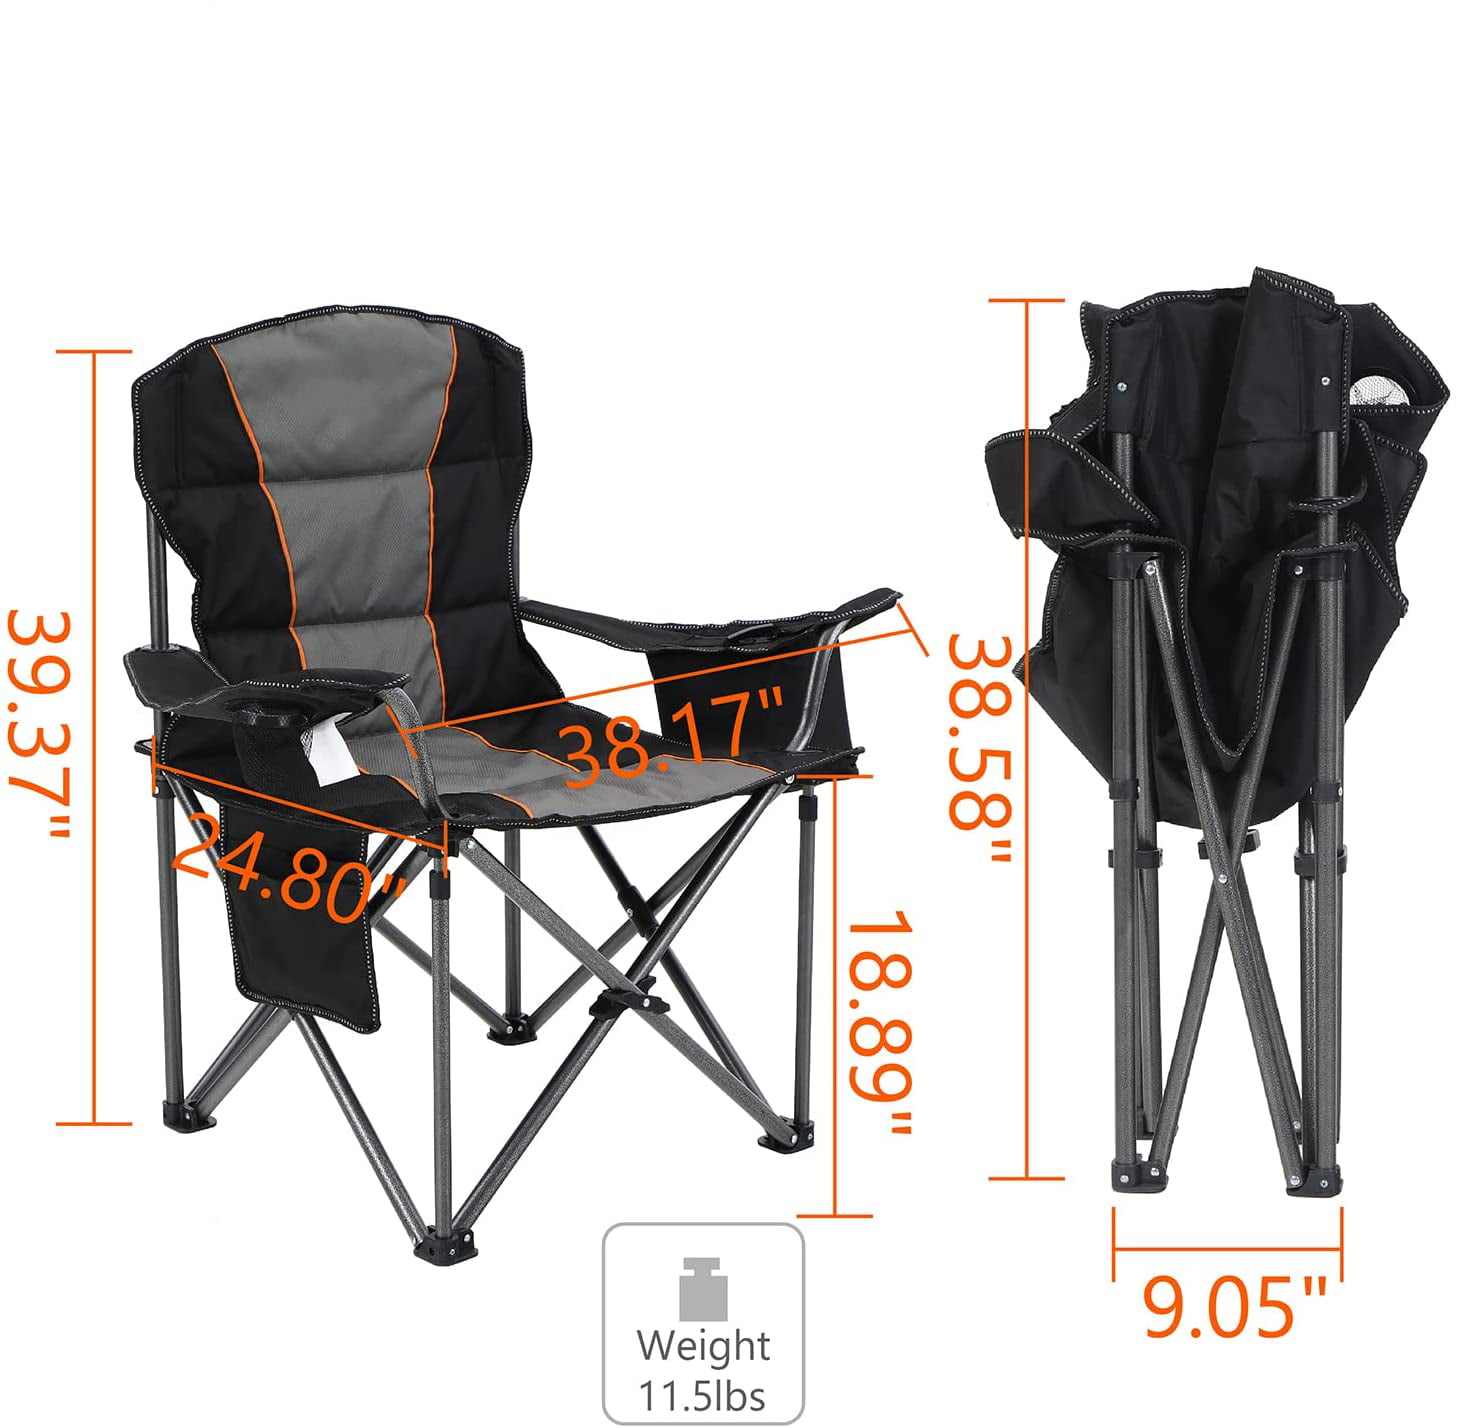 Heavy Duty Folding Camping Chair Oversized Padded Arm Collapsible Steel Frame 